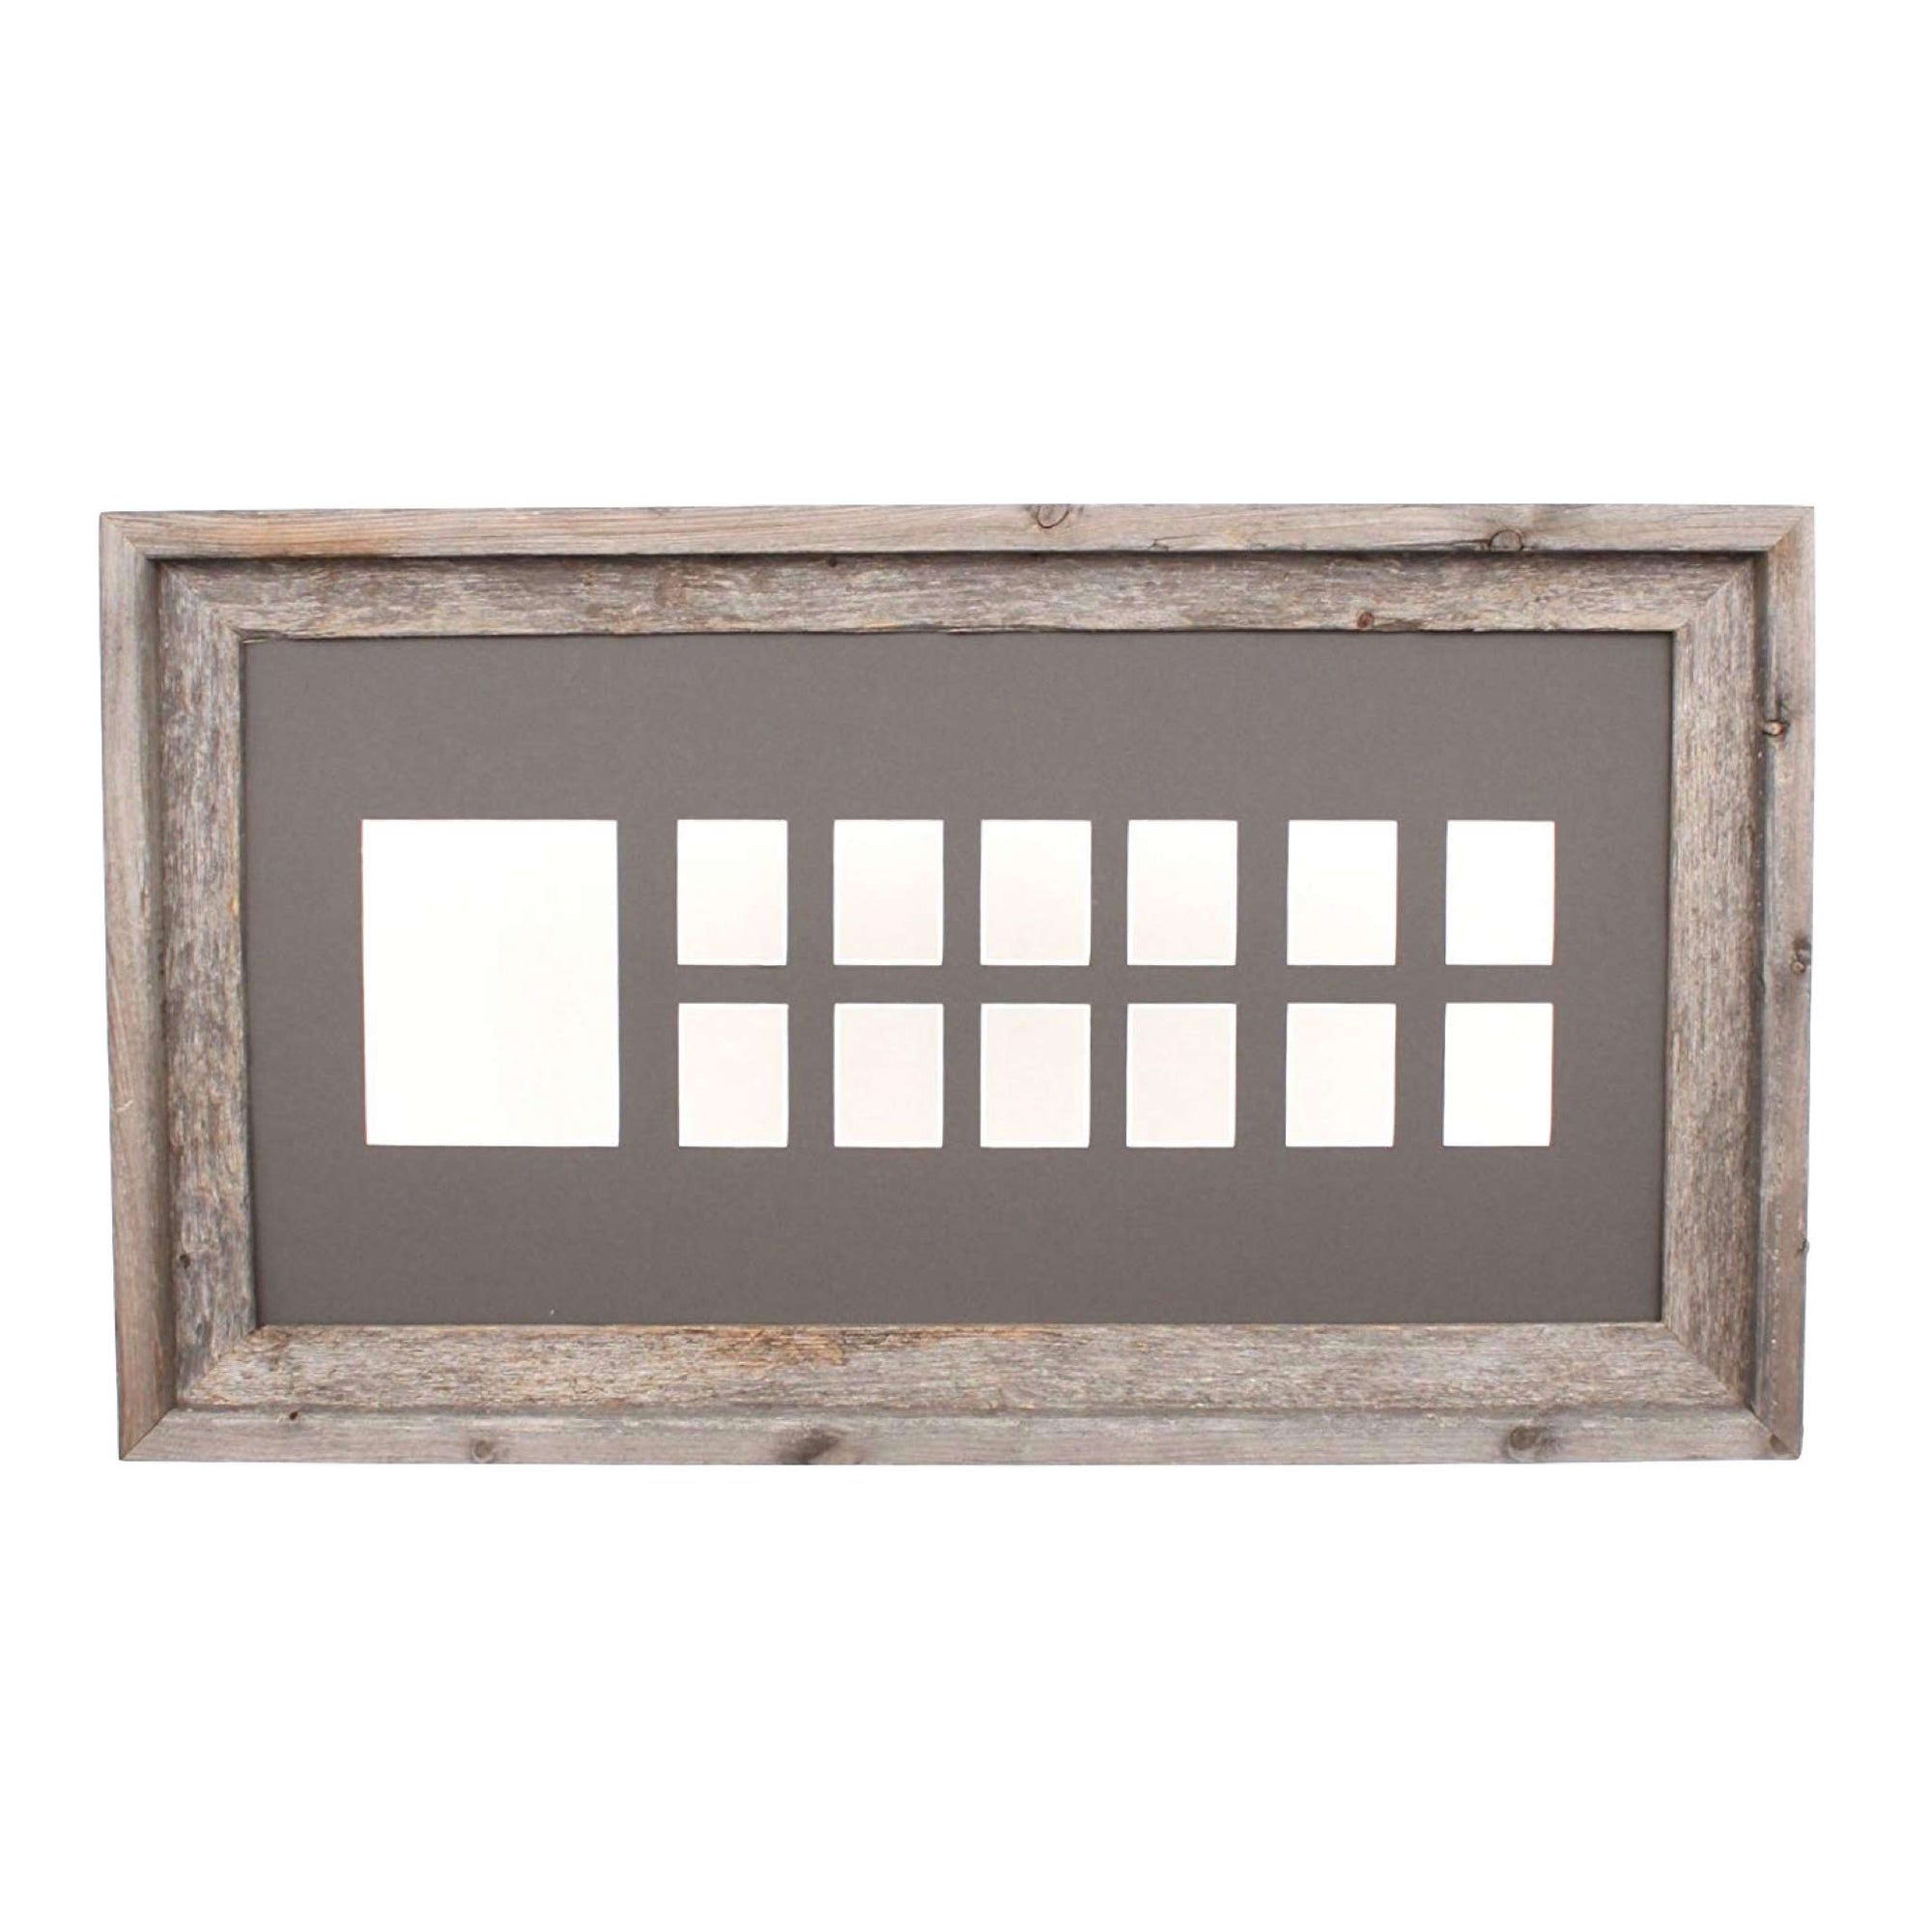 BarnwoodUSA School Years Matted Picture Frame K-12, 100% Upcycled Wood (10x20, Weathered Wood)